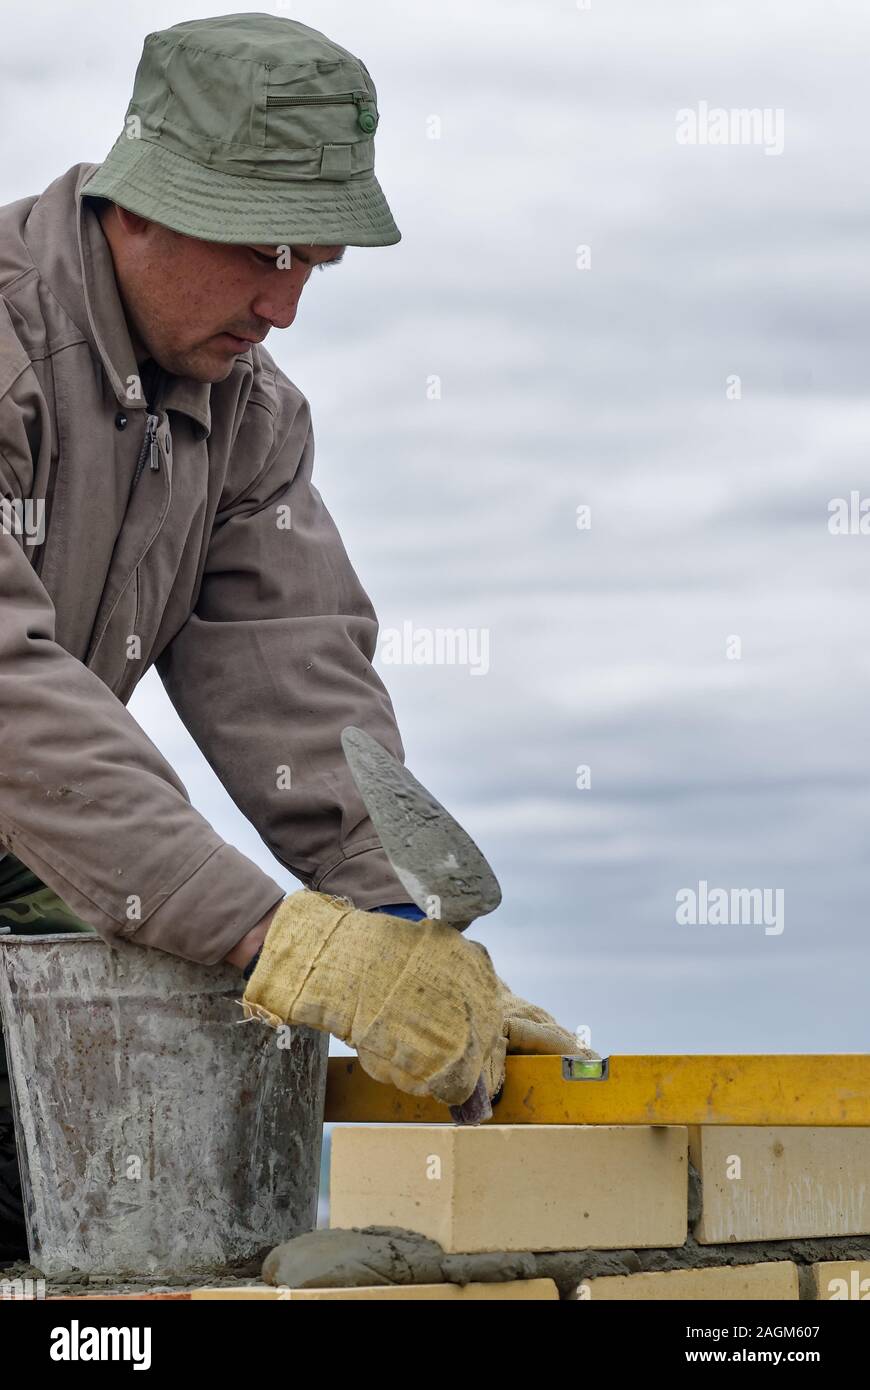 Construction mason worker bricklayer with trowel Stock Photo